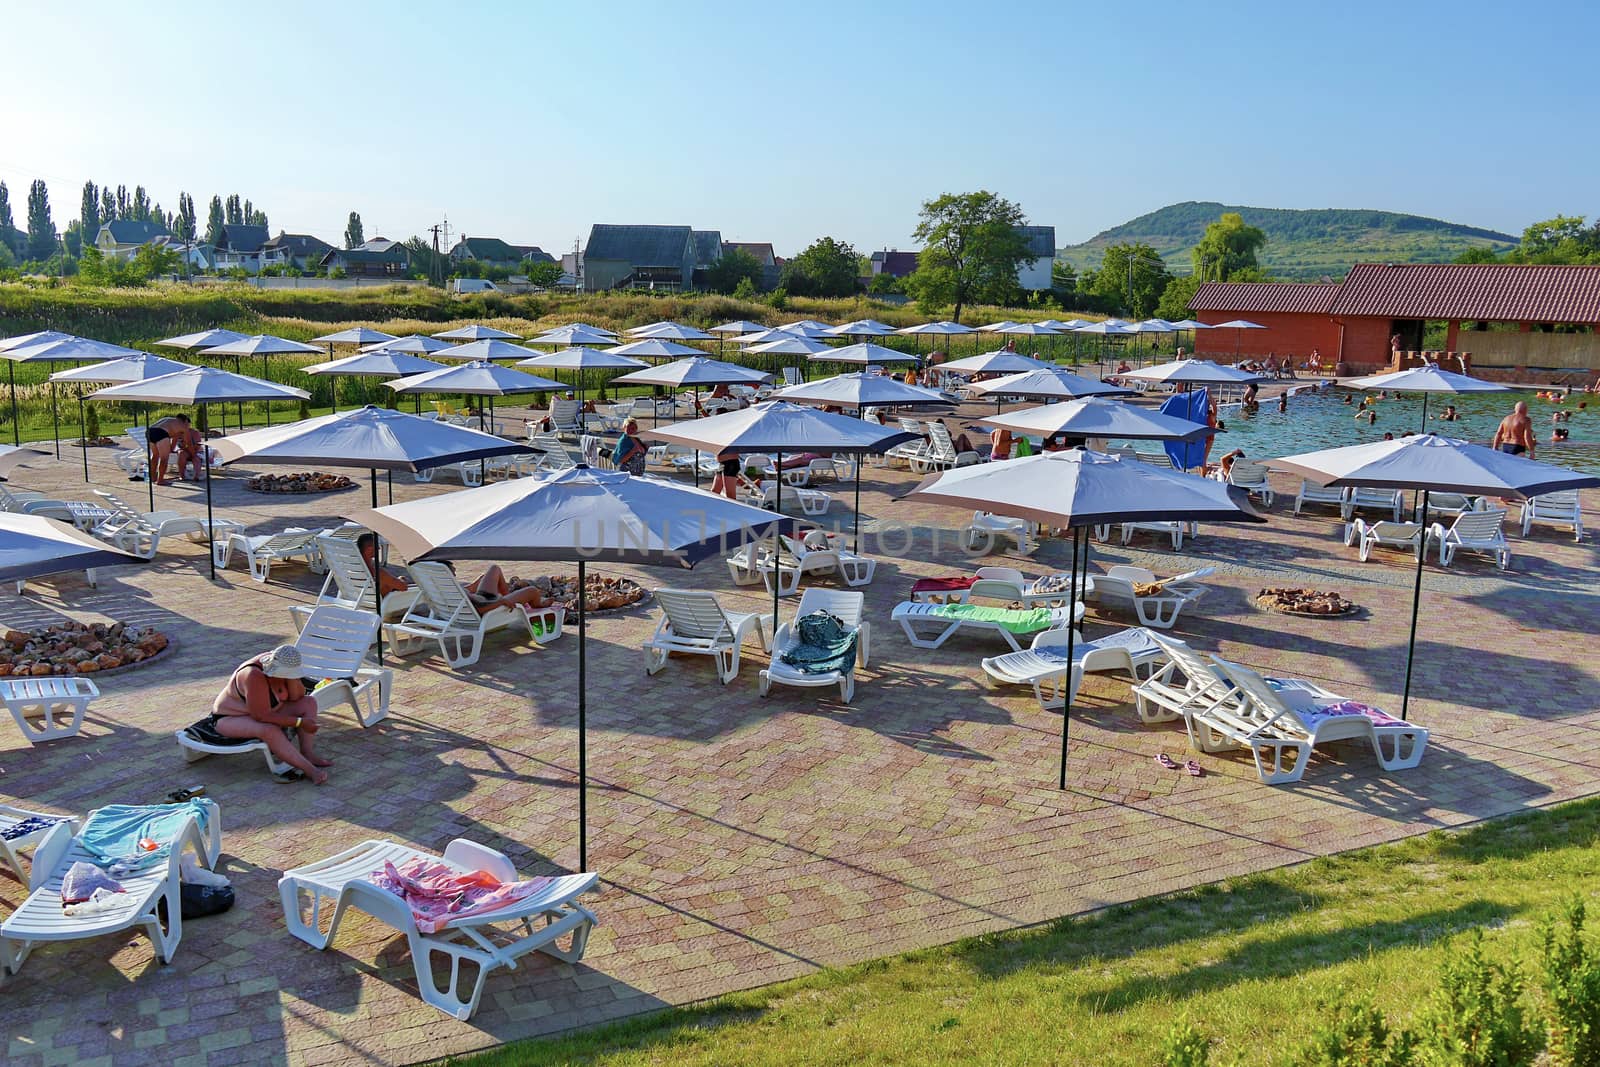 The beach is tiled with sun loungers and umbrellas. People can warm their bodies in the sun by Adamchuk